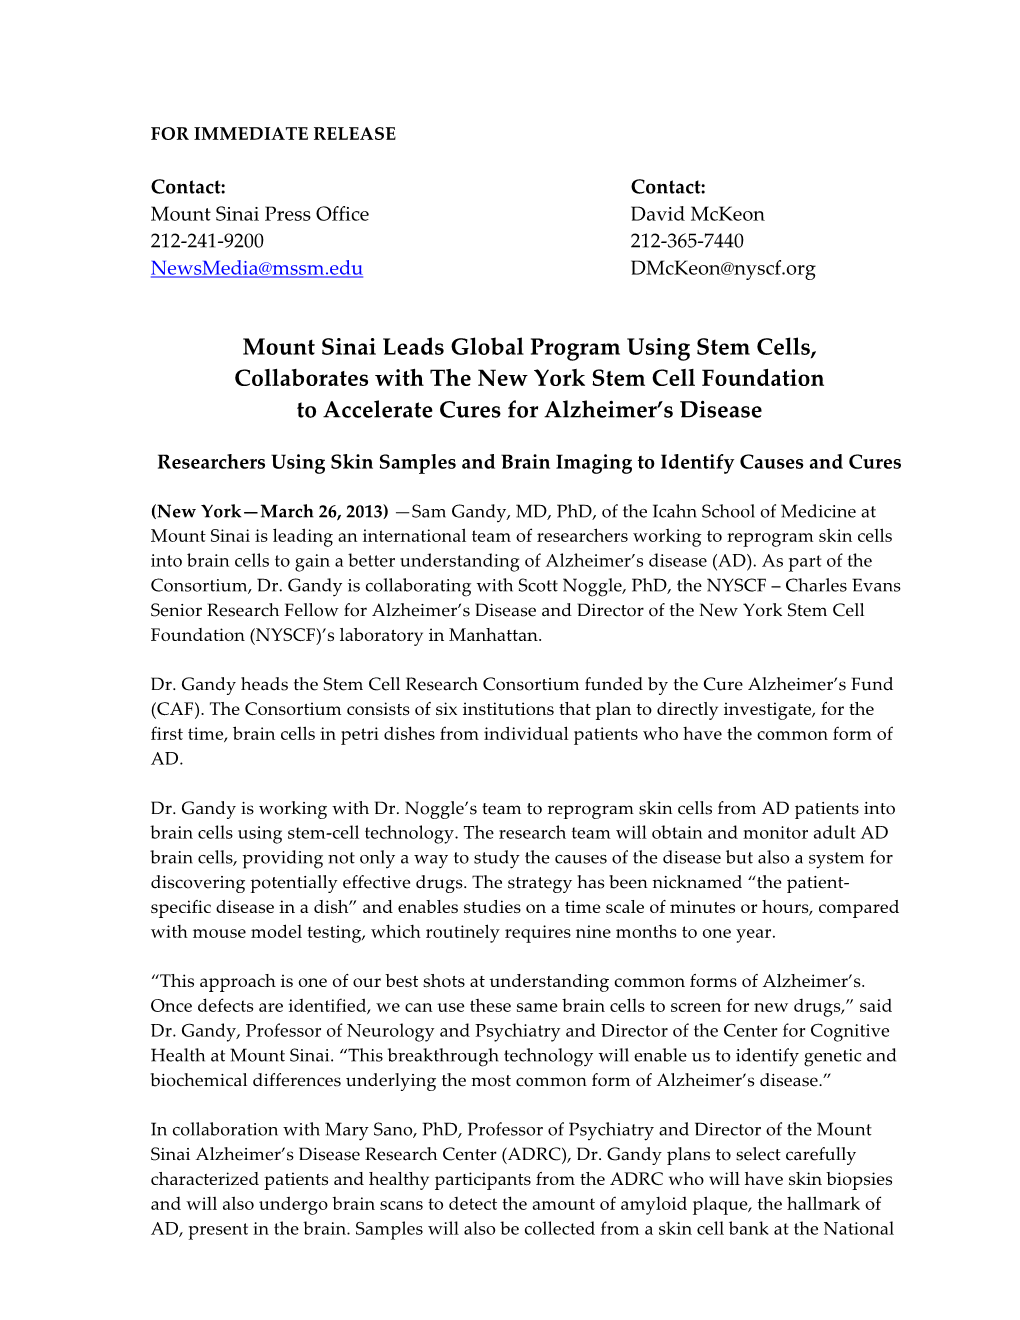 Mount Sinai Leads Global Program Using Stem Cells, Collaborates with the New York Stem Cell Foundation to Accelerate Cures for Alzheimer’S Disease